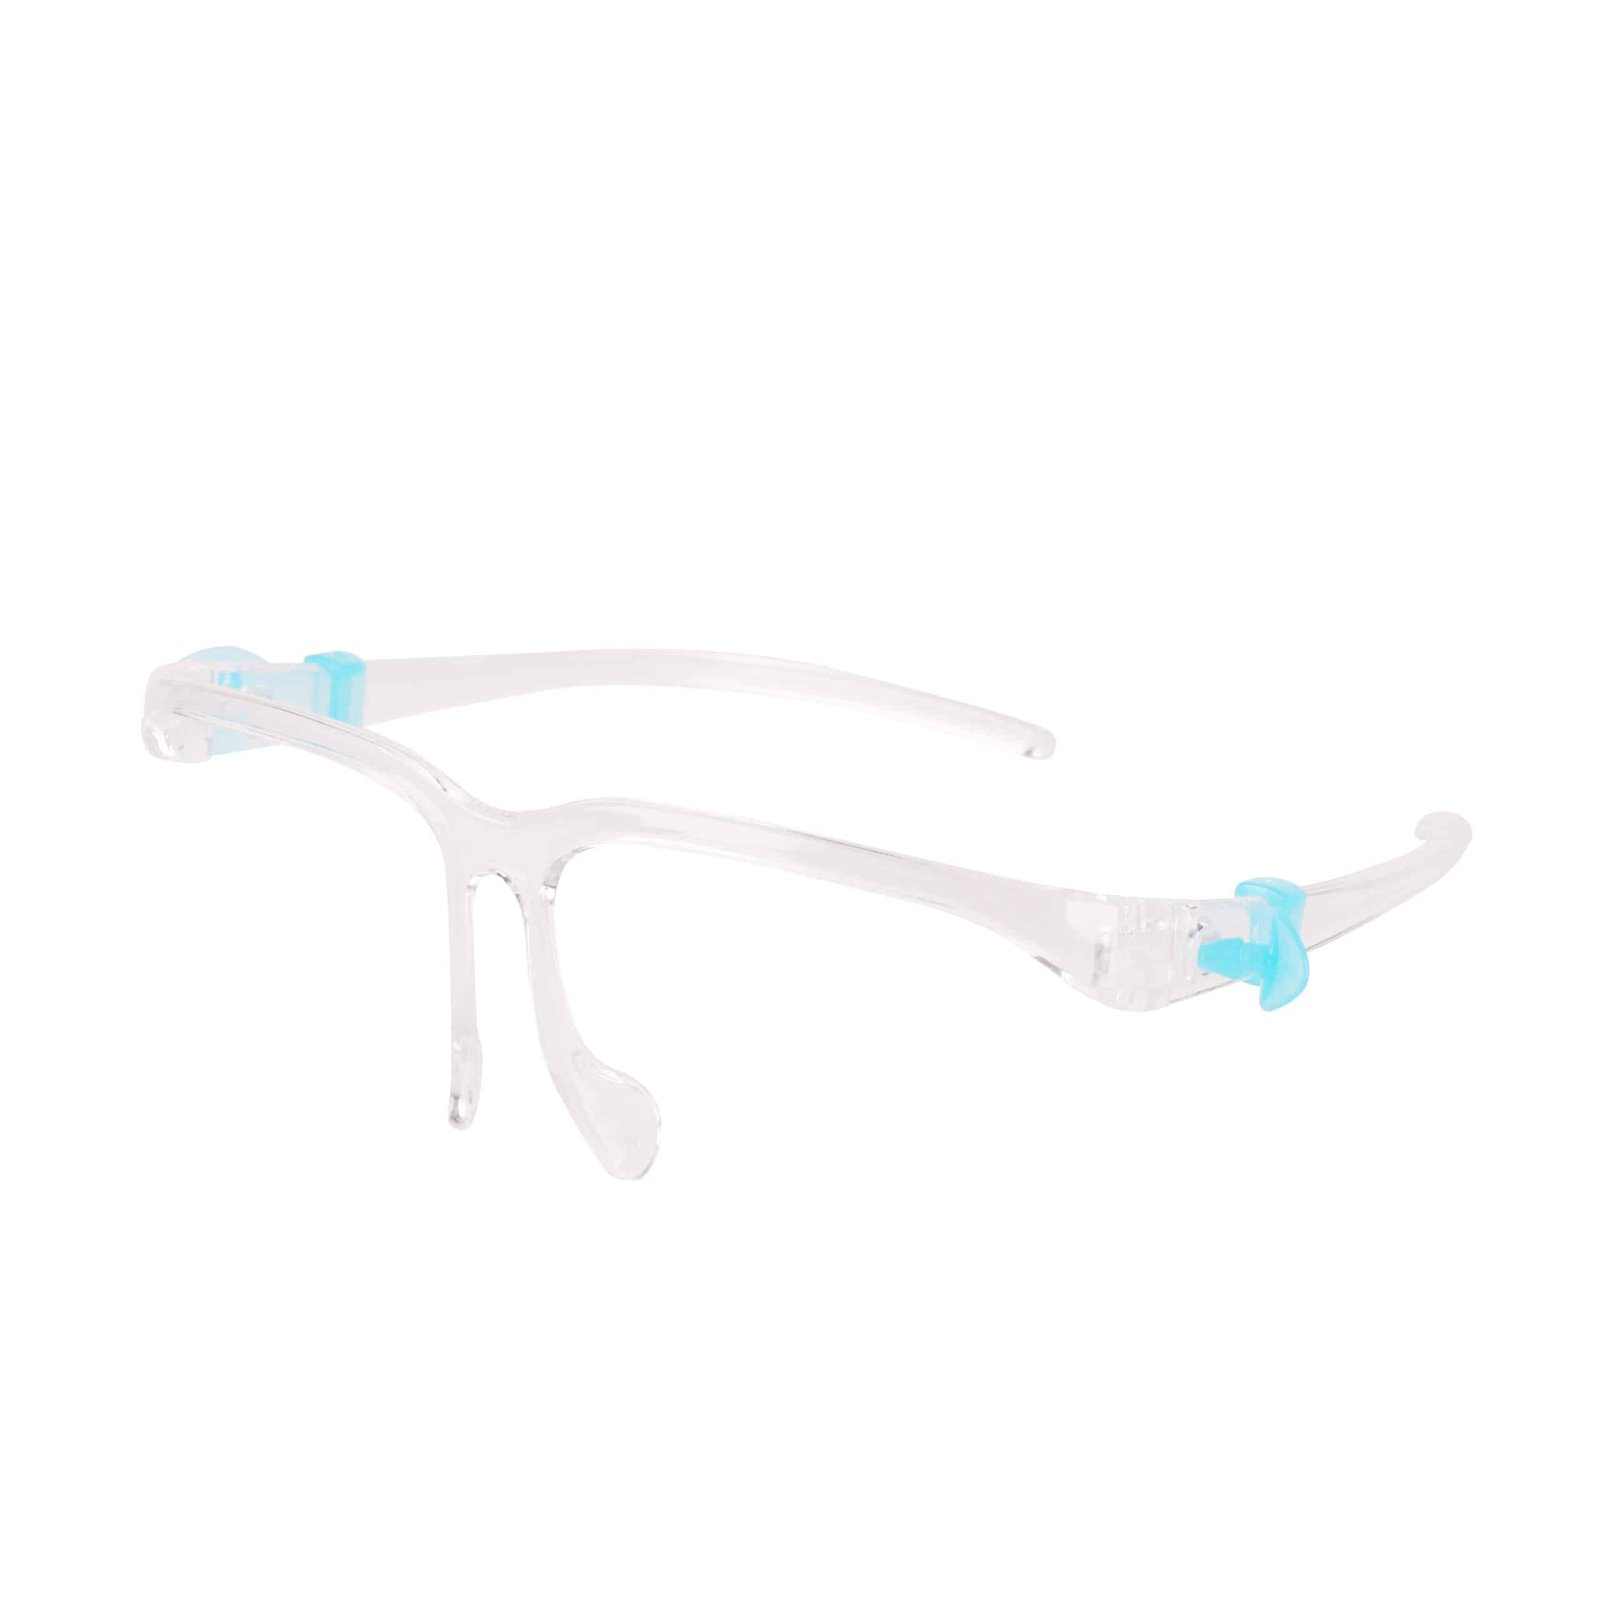 Transparent face shield with glasses - Face shield master-A ...